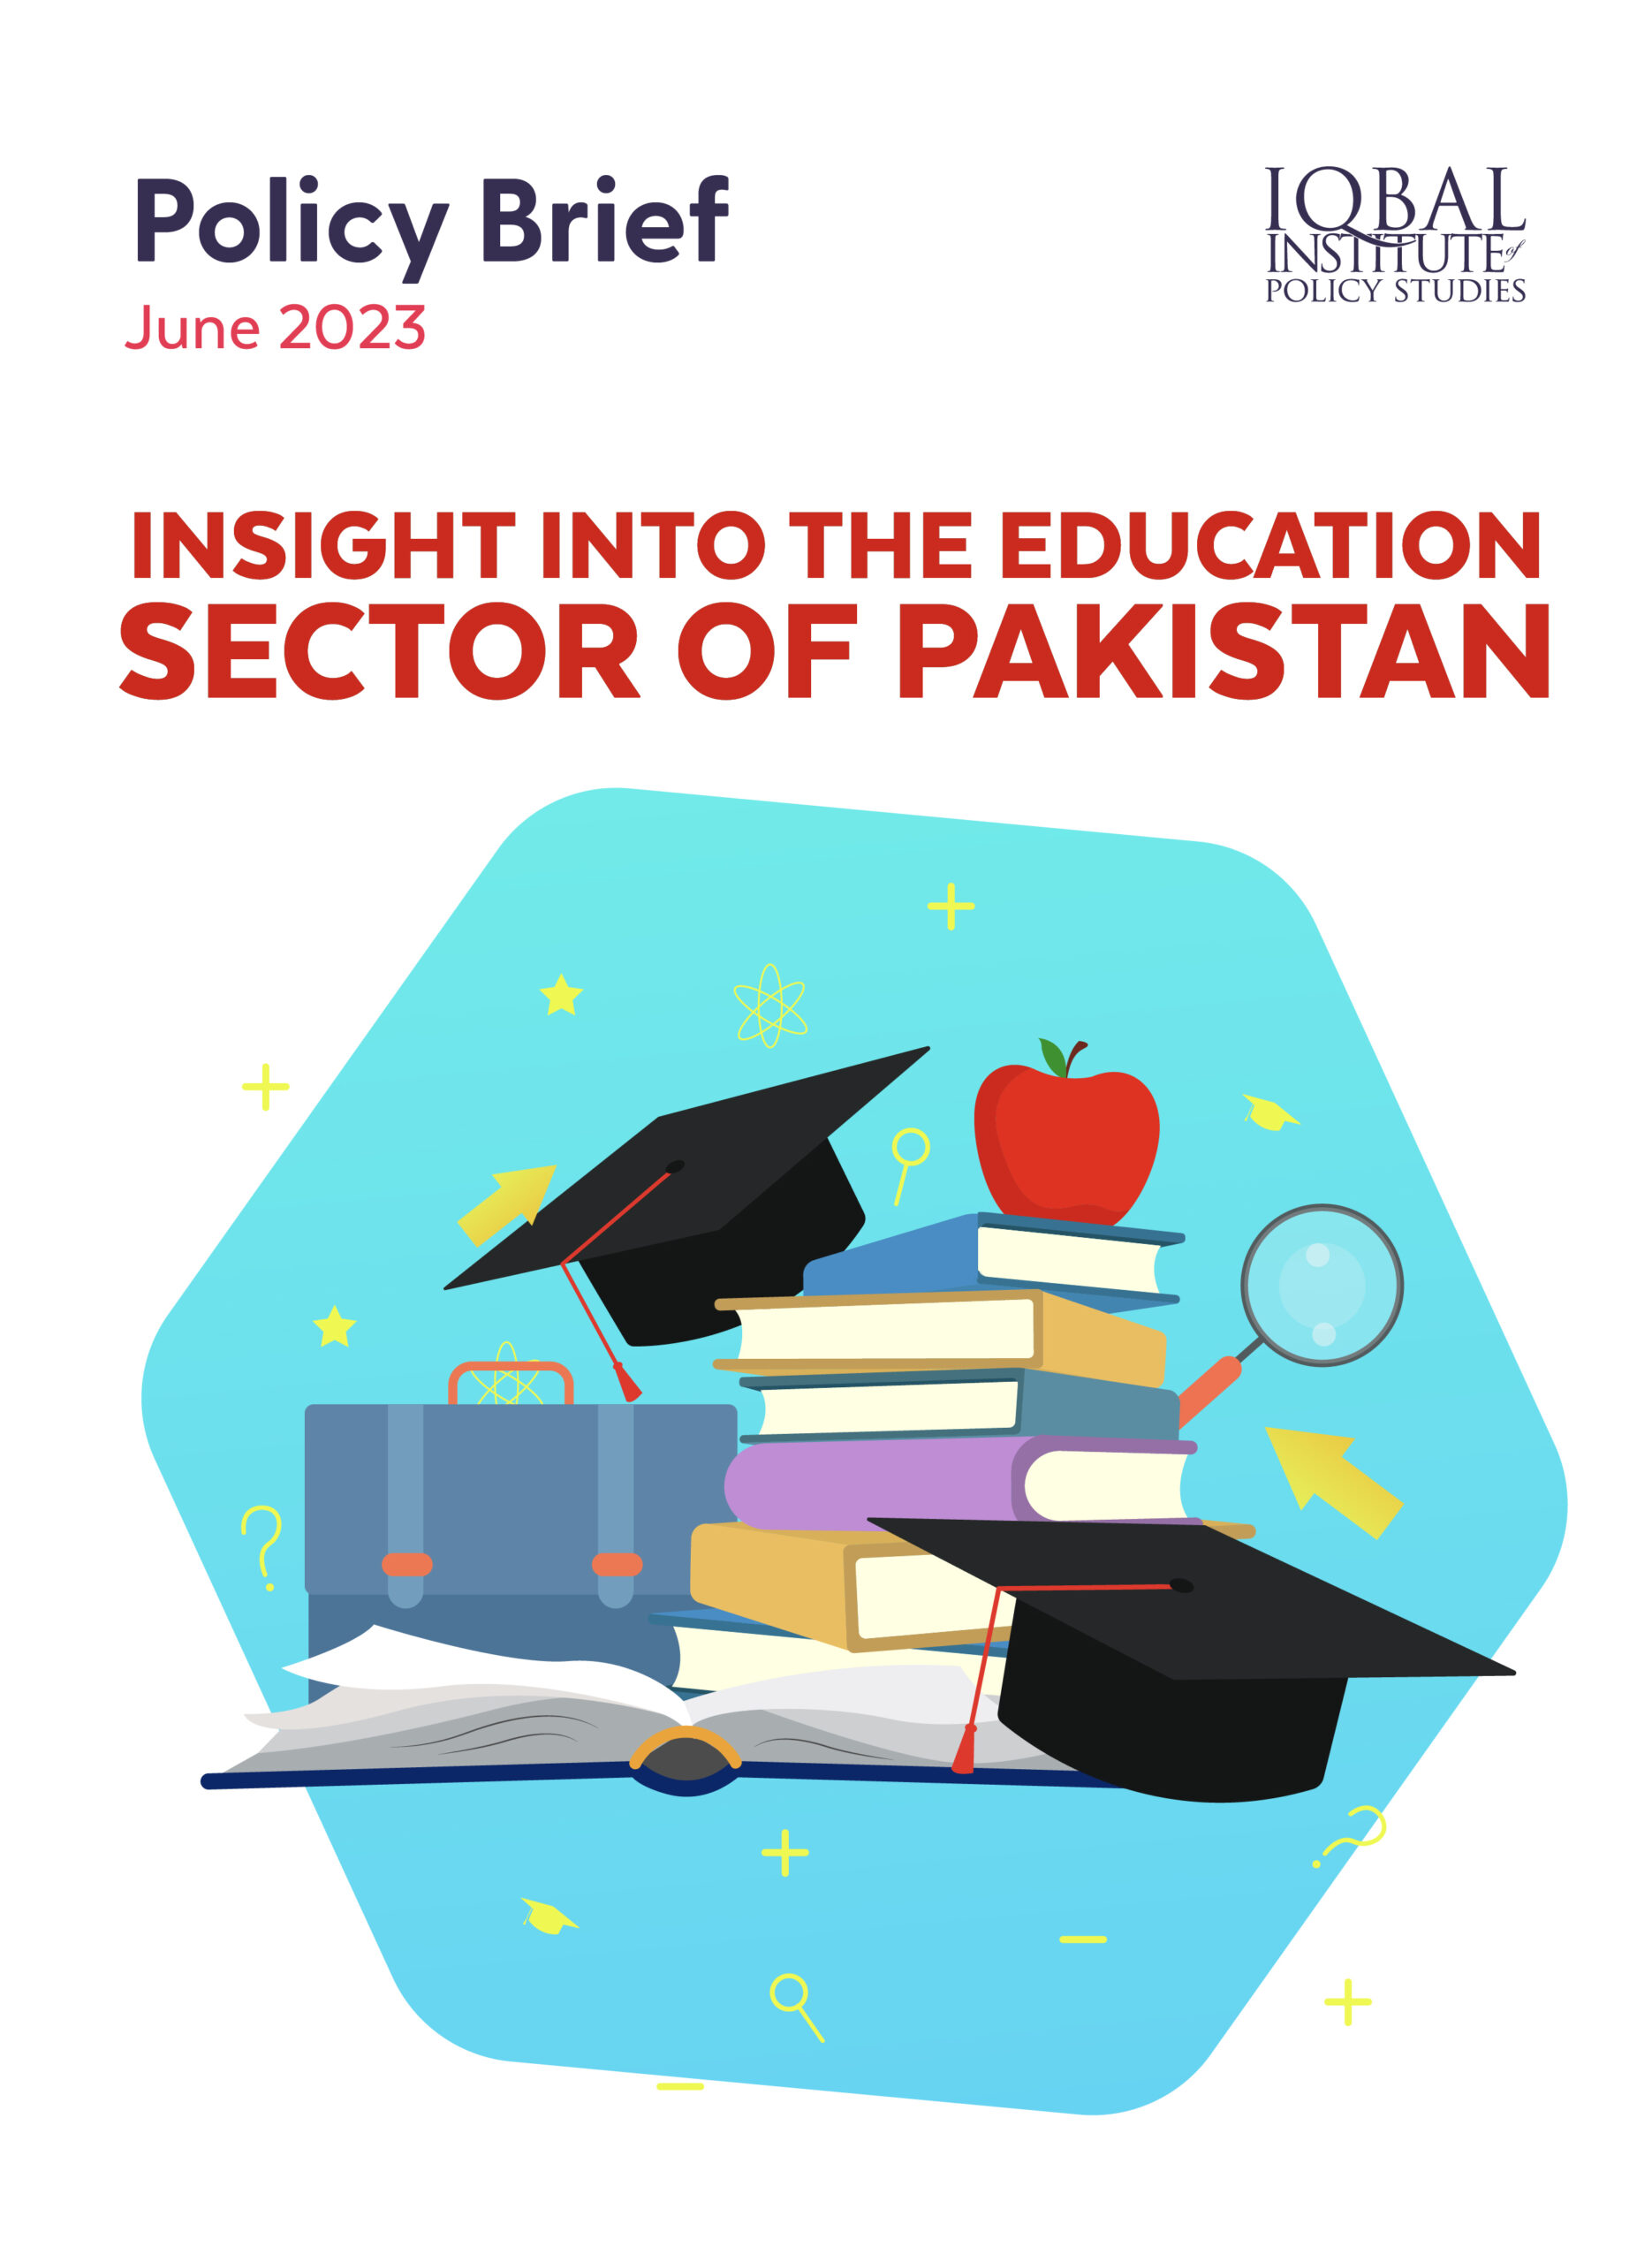 Insight into the Education Sector of Pakistan - Policy Brief